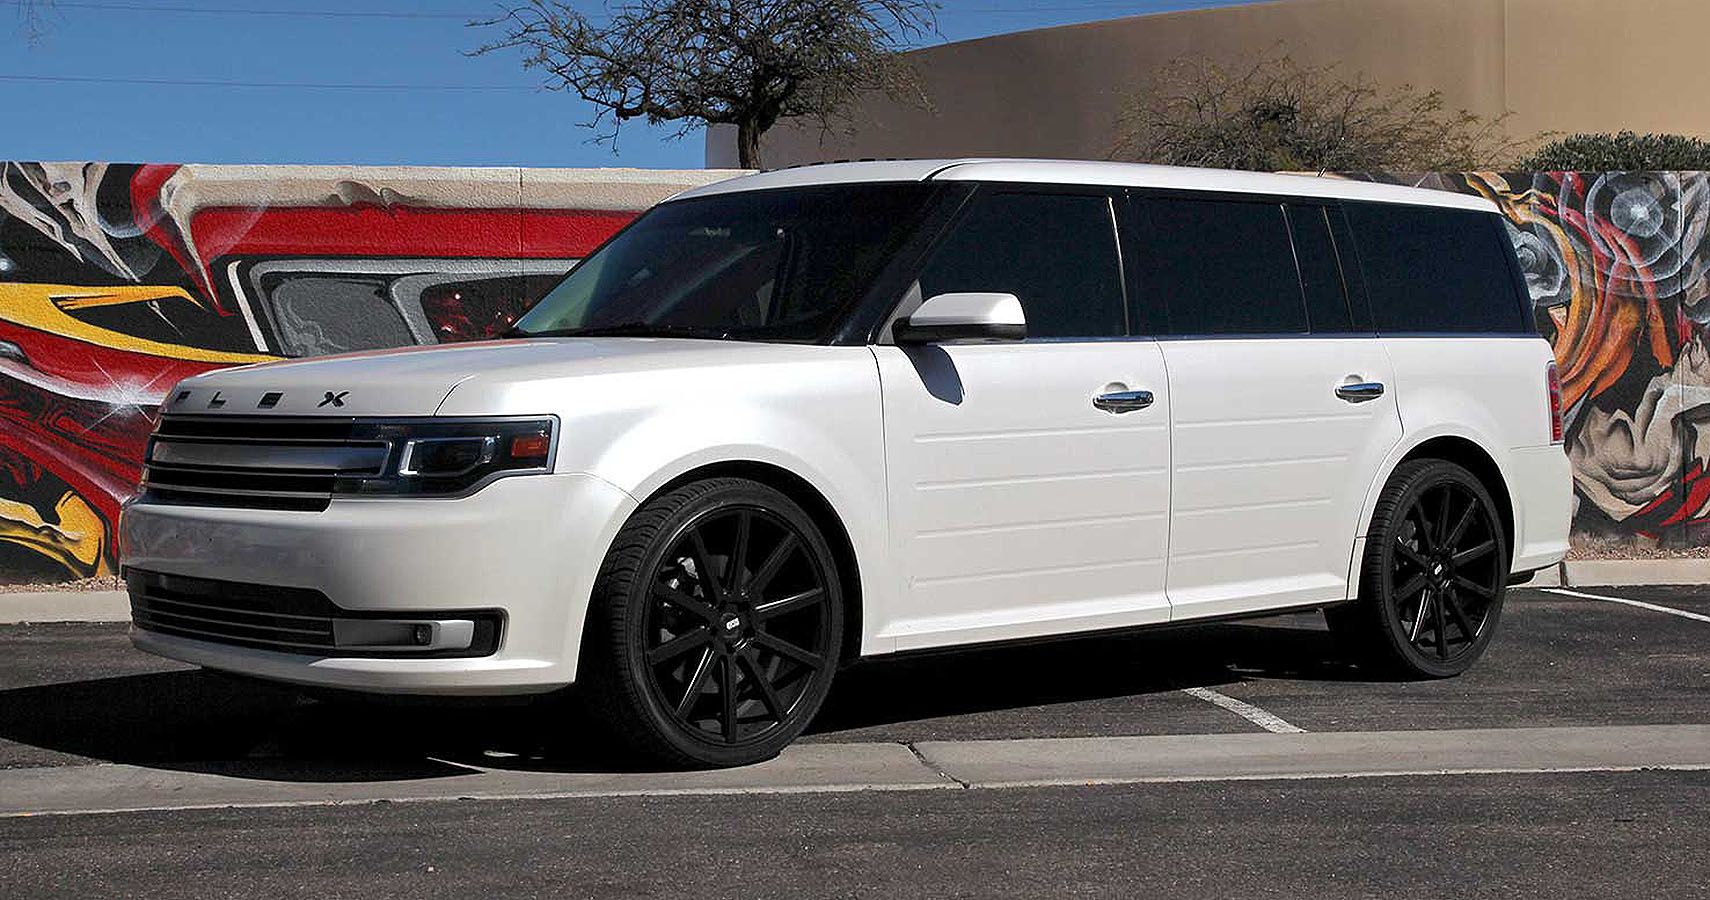 2009-2019 Ford Flex: Too Boxy For Appeal